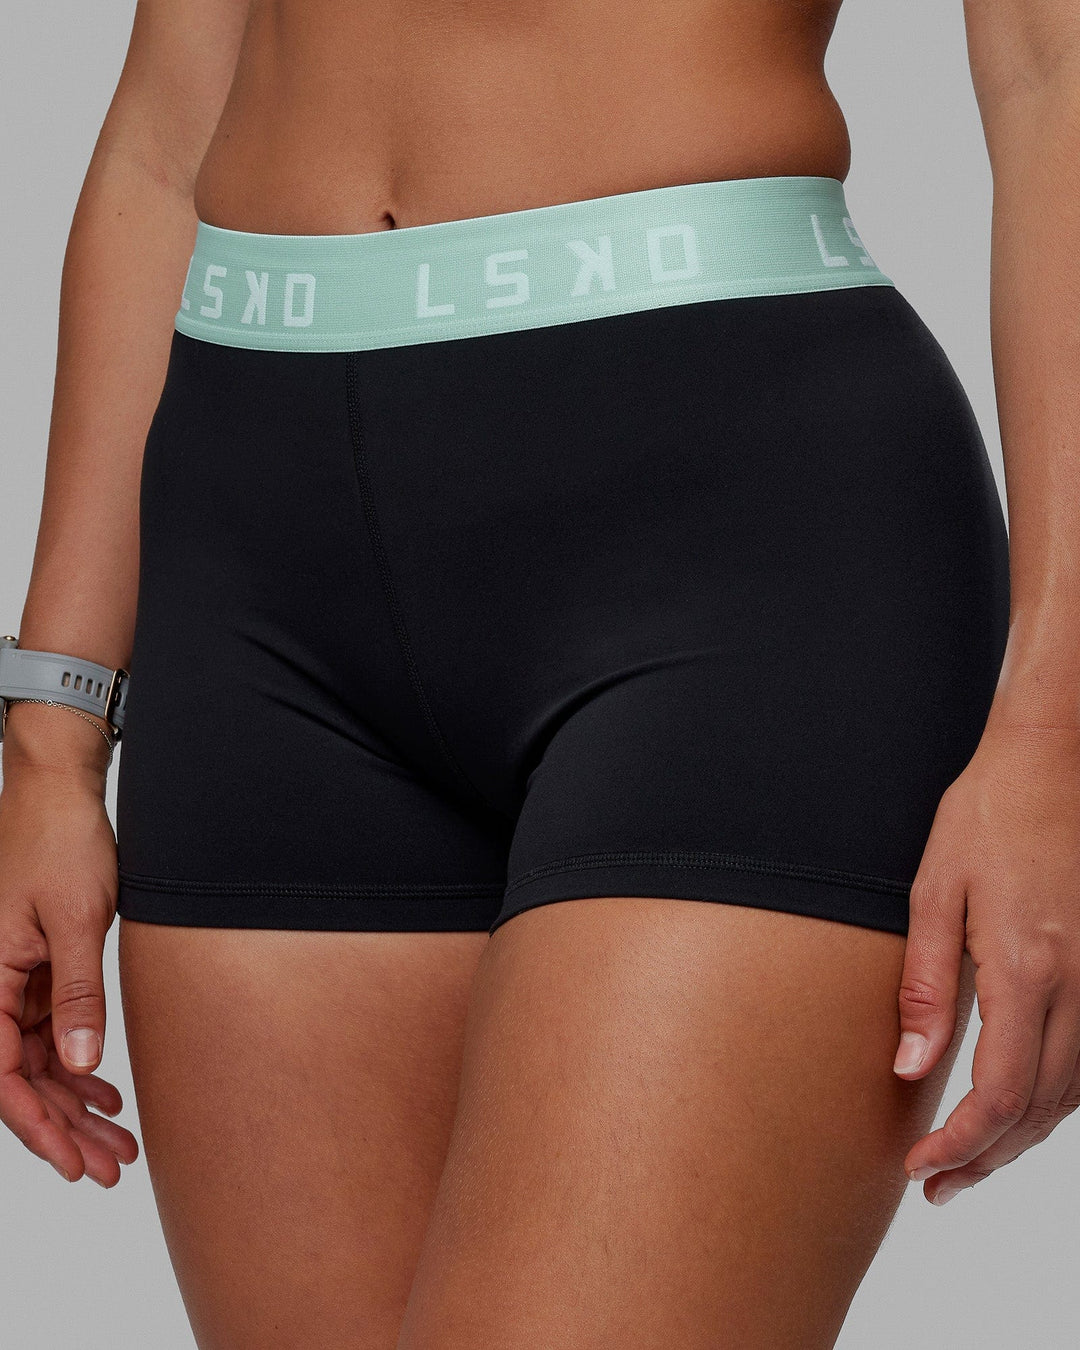 Woman wearing Extend X-Short Tights - Black-Pastel Turquoise